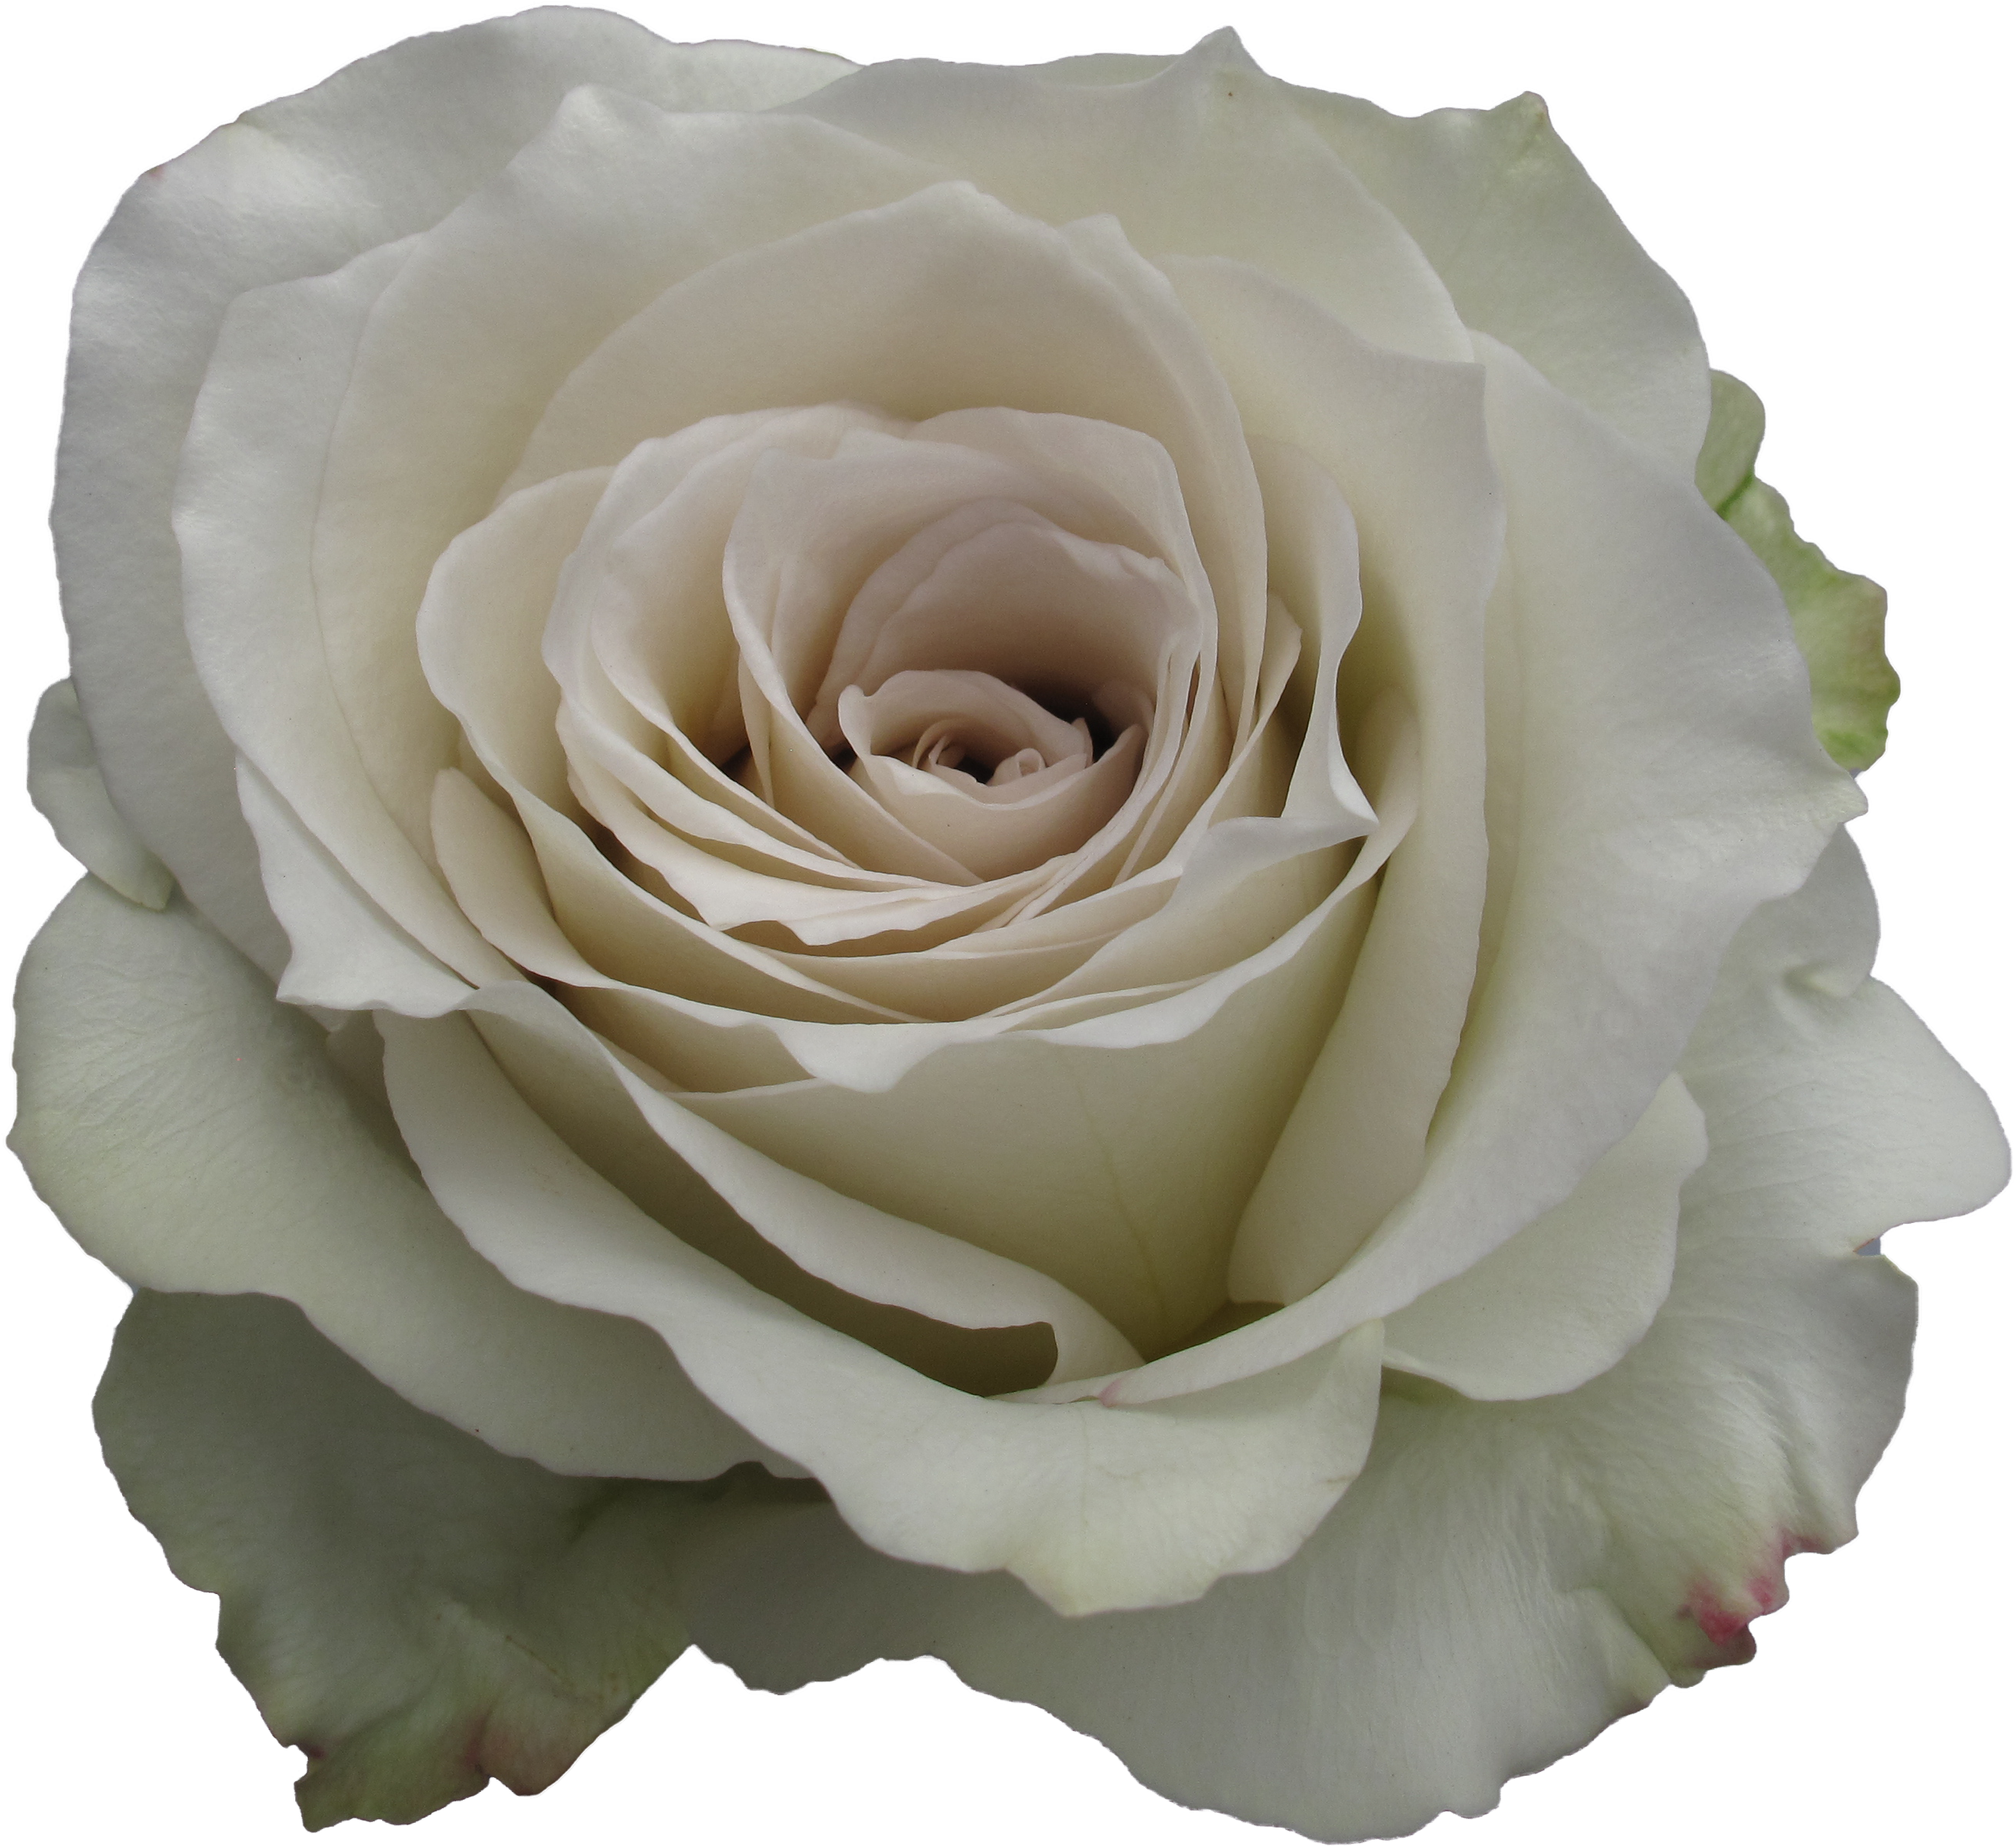 A Close Up Of A White Rose